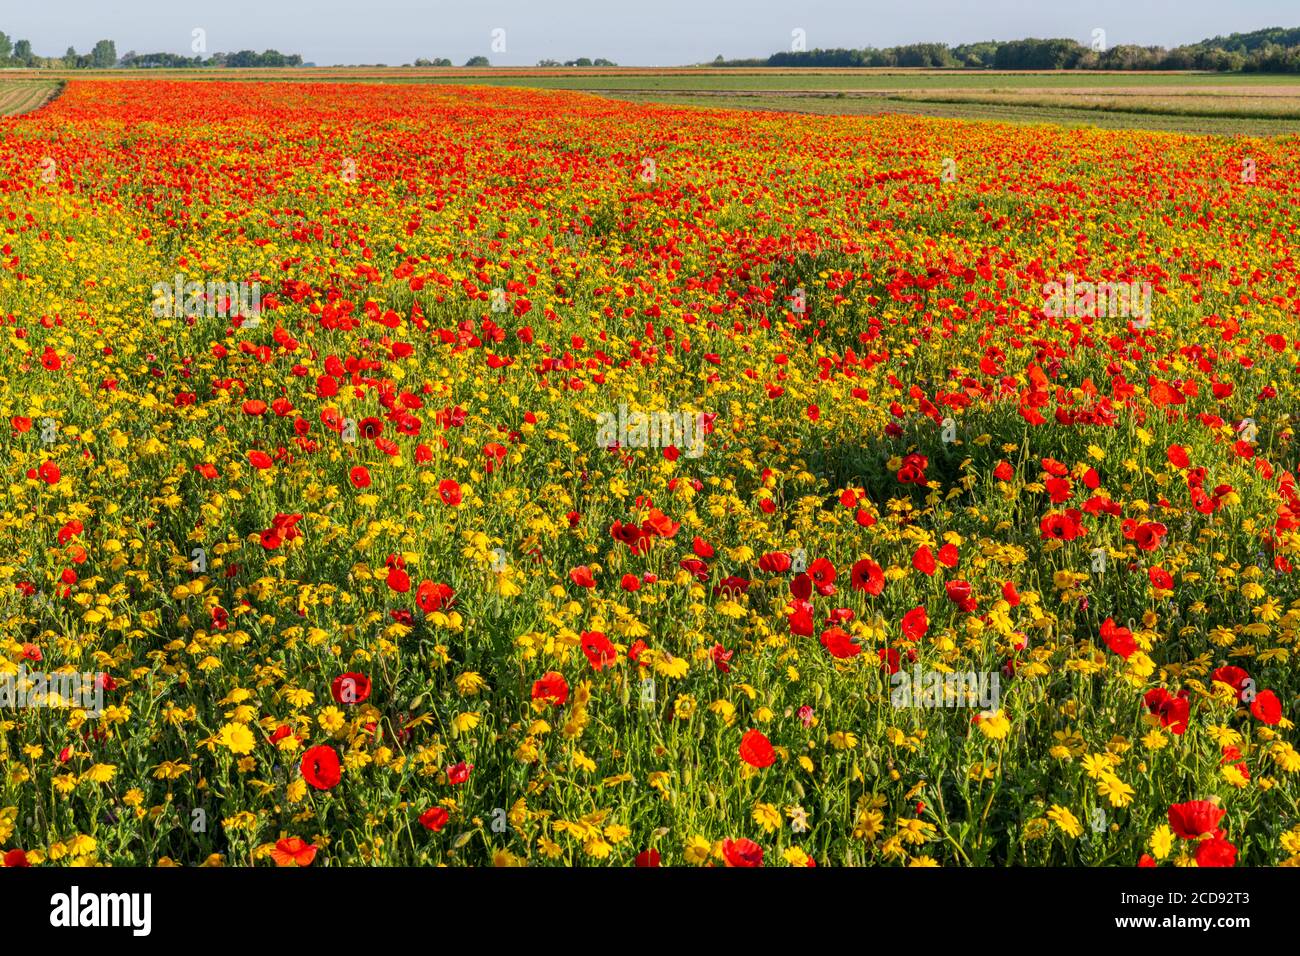 France, Somme, Bay of the Somme, Saint-Valery-sur-Somme, The fields of poppies between Saint-Valery-sur-Somme and Pend? have become a real tourist attraction and many people come to photograph there Stock Photo